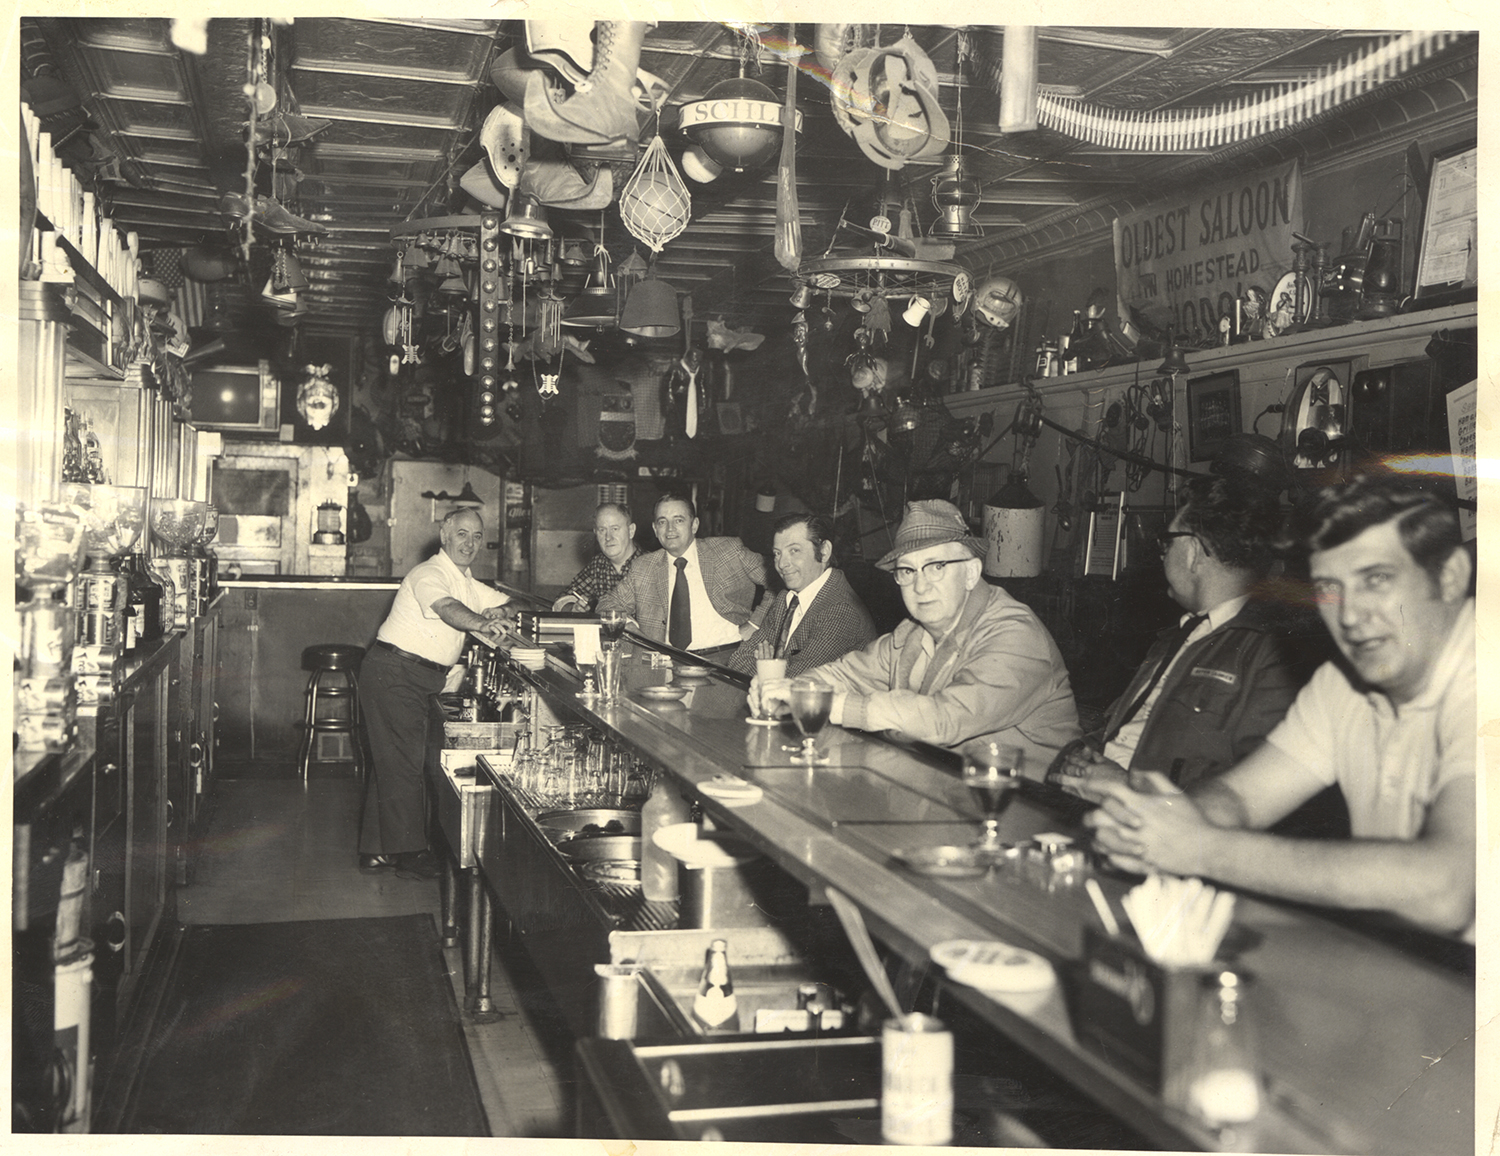 Faces along the bar at Chiodo’s Tavern, c. 1970. Chiodo’s Tavern Collection, 2005.173, Detre Library & Archives, Heinz History Center.